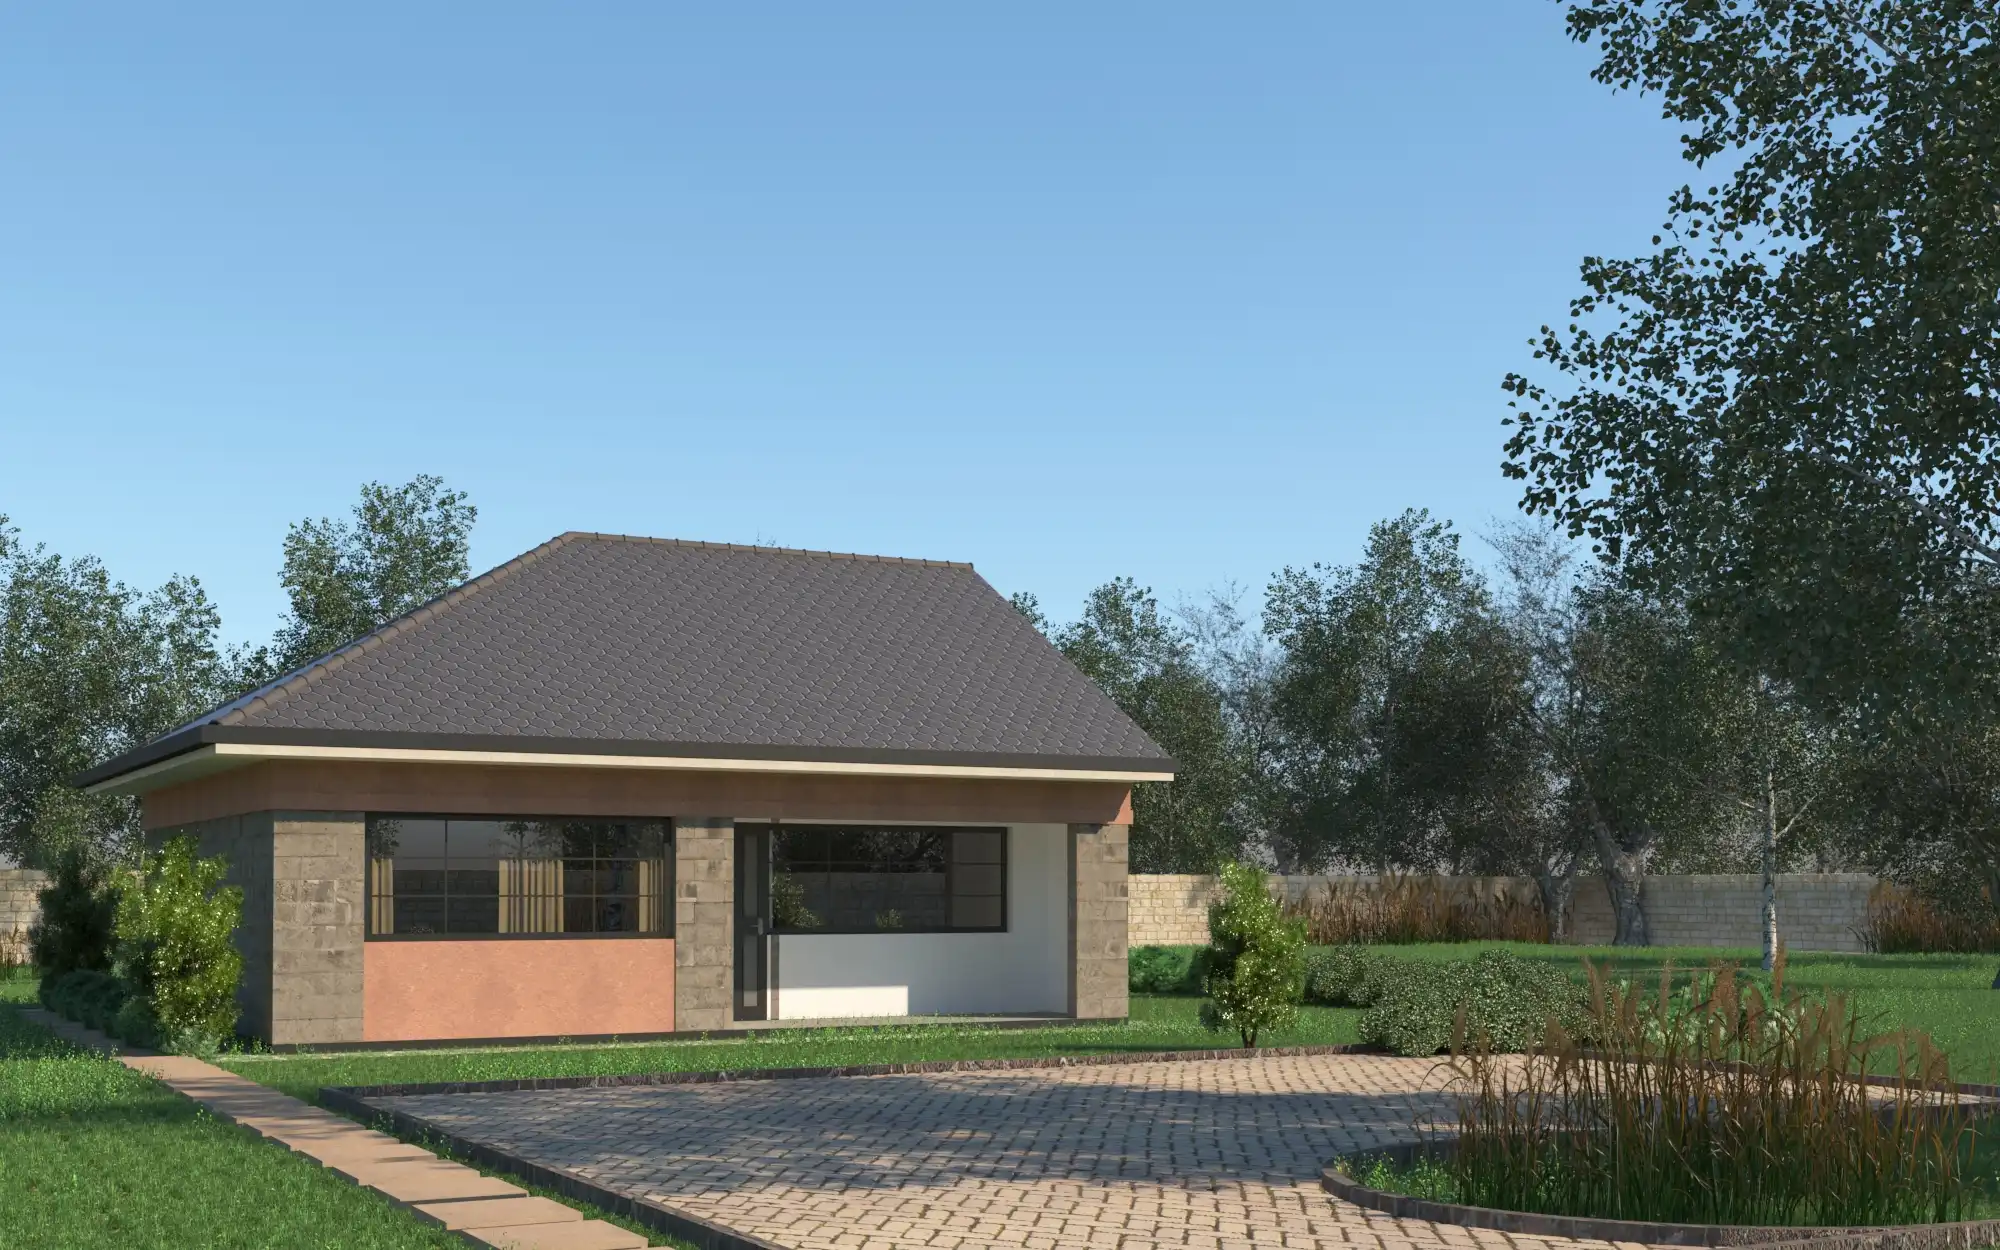 4 Bedroom Jenga Pole Pole Bungalow - ID 4171 - Phase 2 Front from Inuua Tujenge house plans with 4 bedrooms and 2 bathrooms. ( jengapolepole )